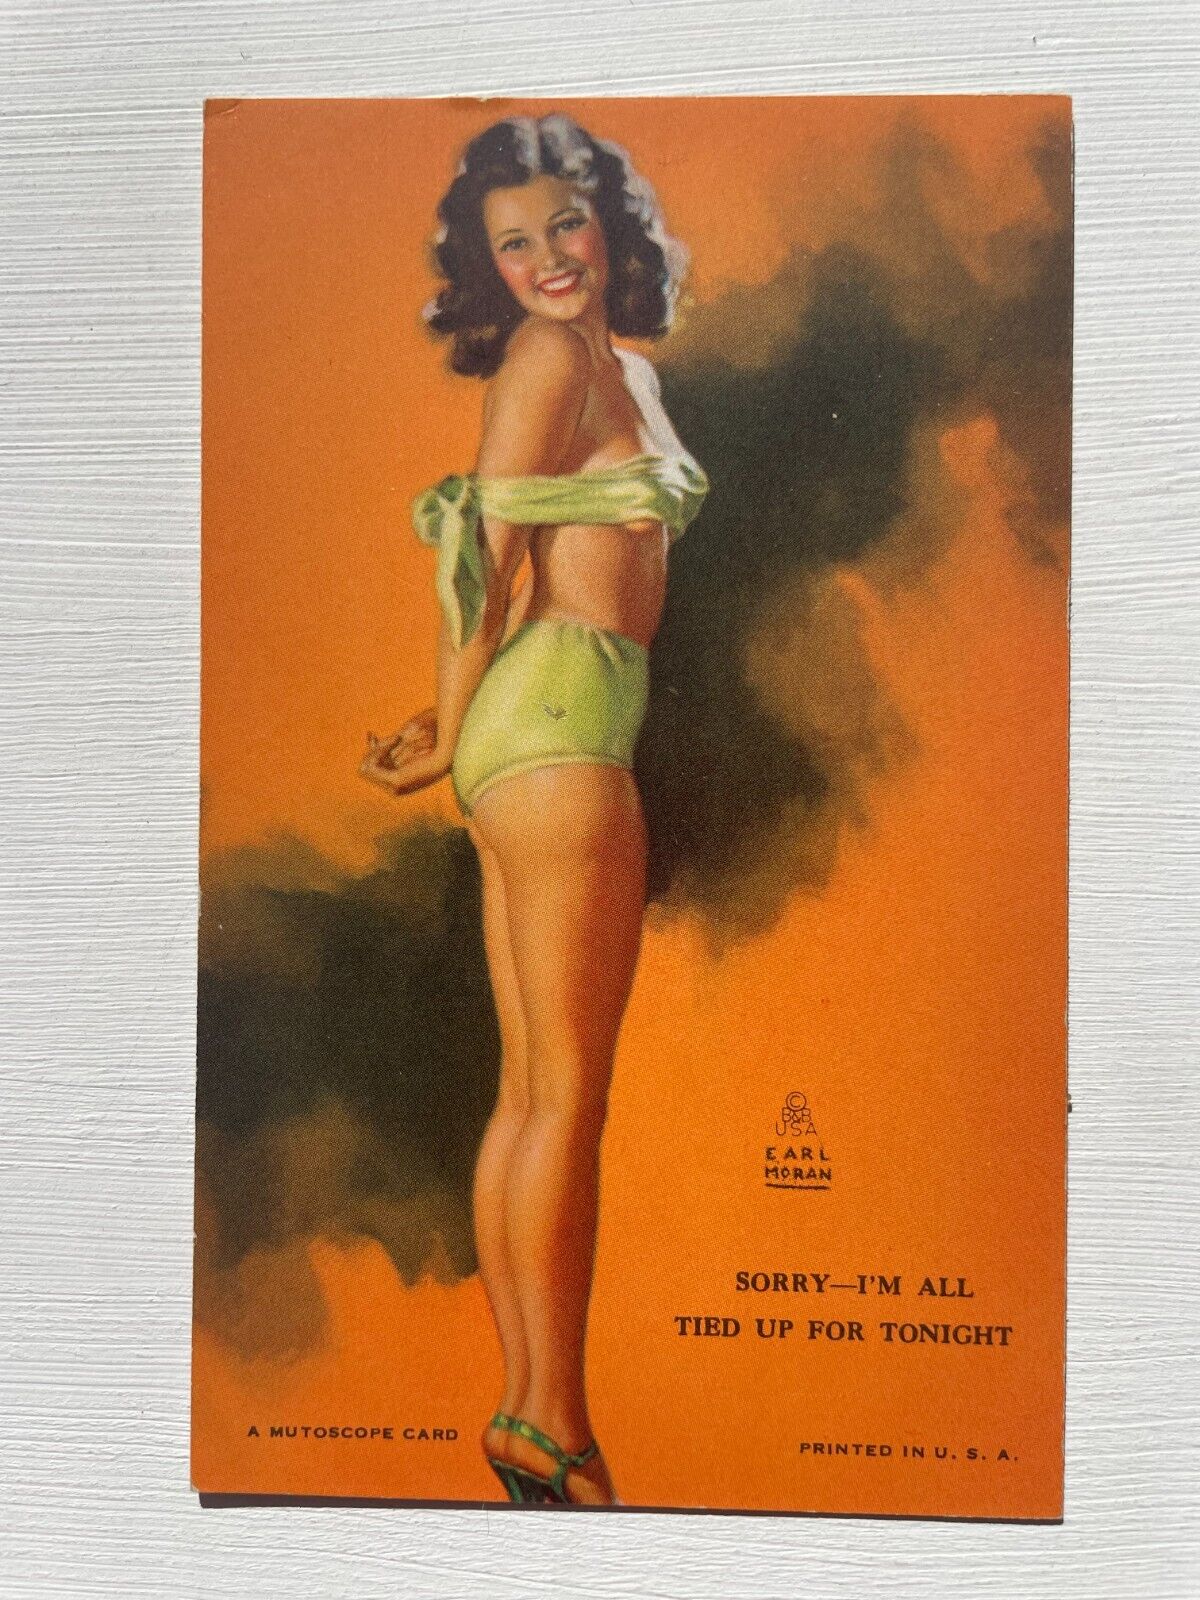 1940's Pinup Girl Picture Mutoscope Card-Earl Moran- All Tied Up